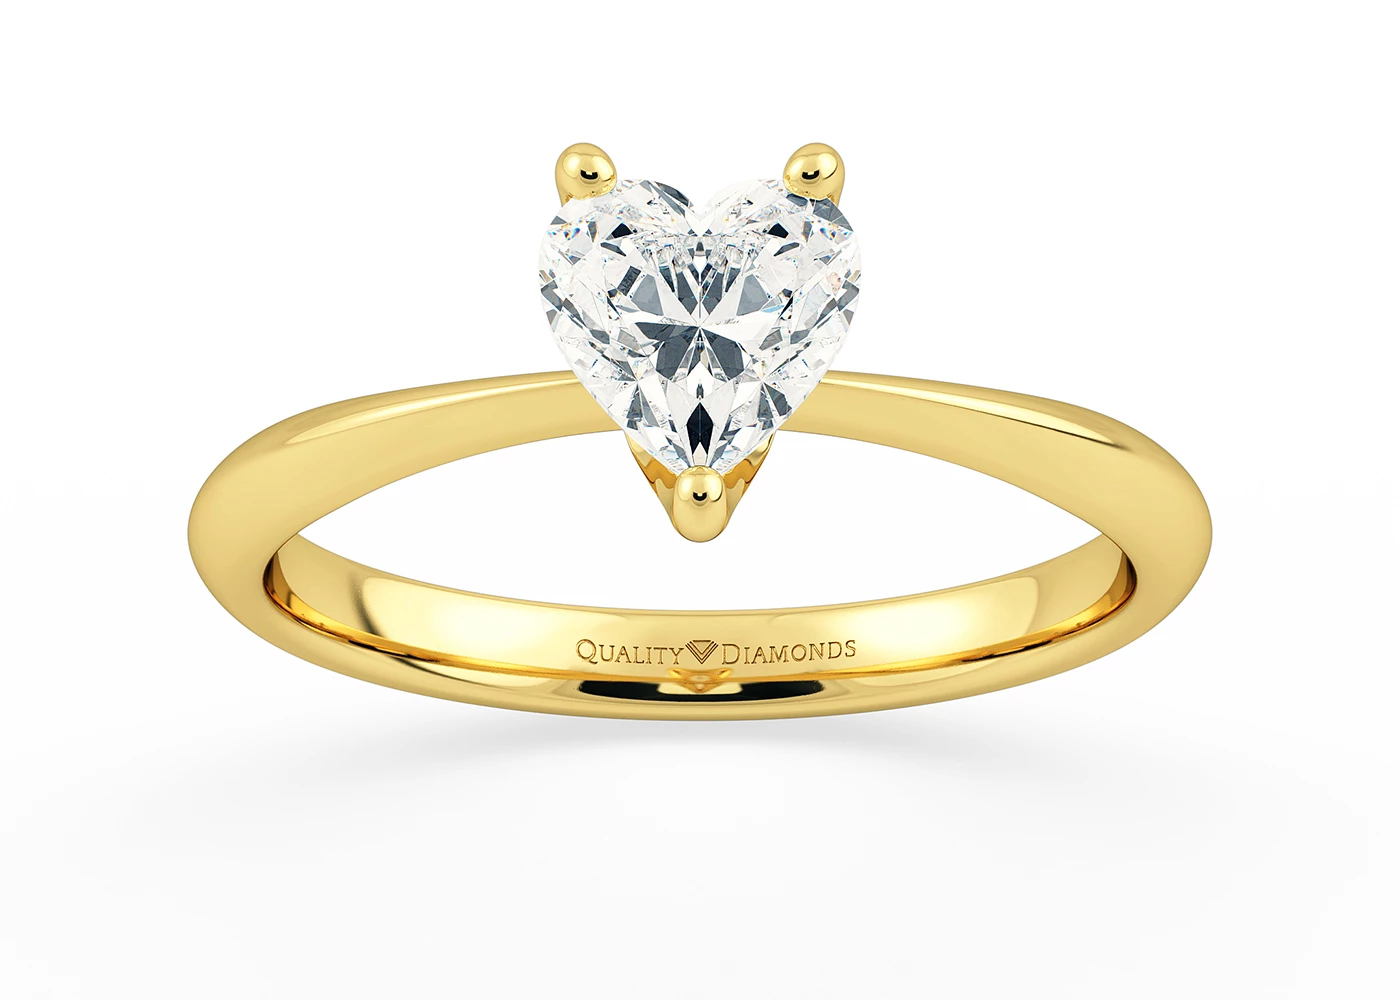 Two Carat Heart Solitaire Diamond Engagement Ring in 18K Yellow Gold